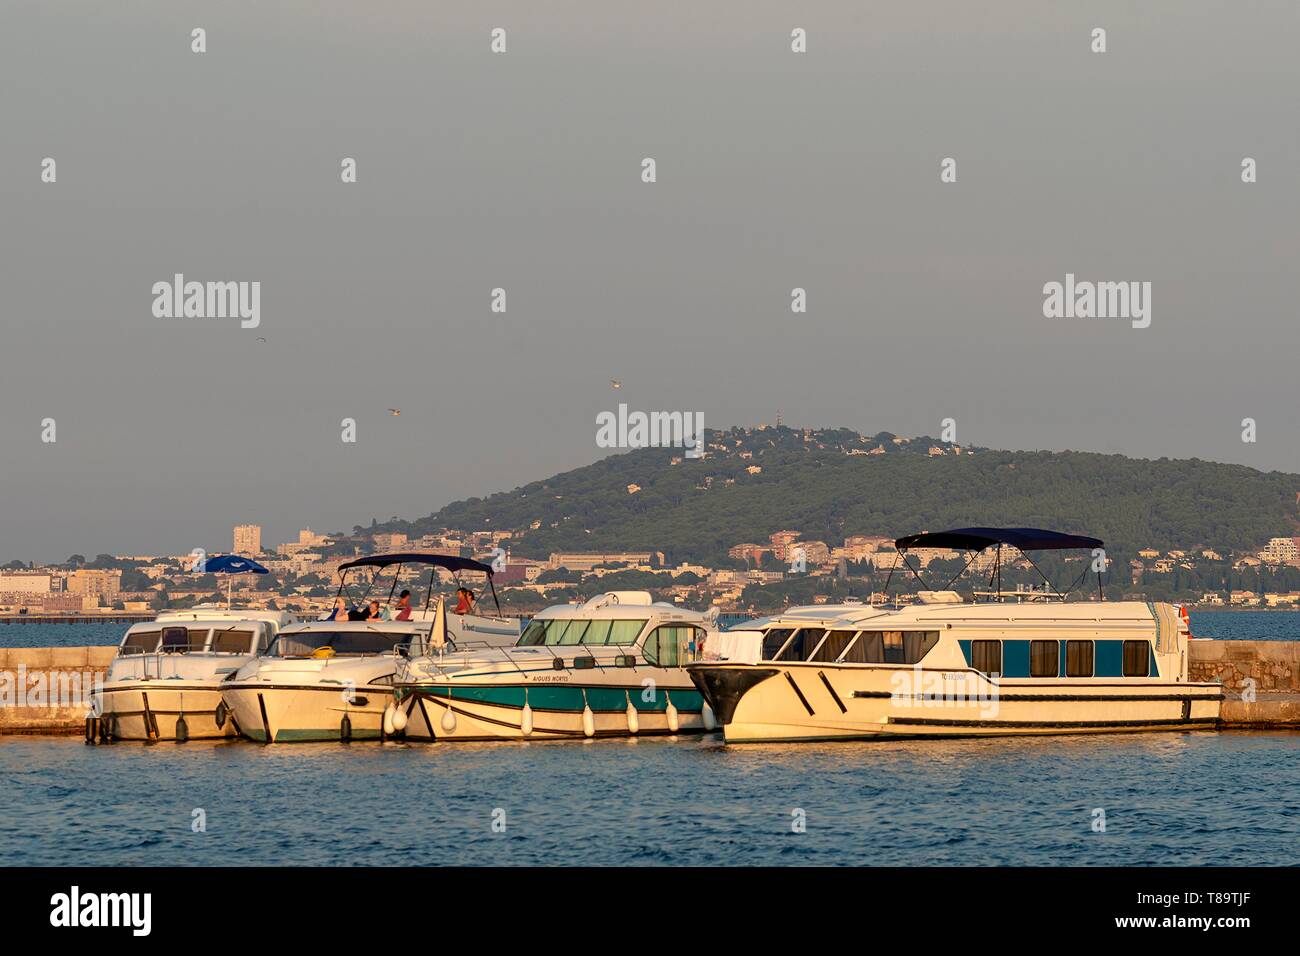 France, Herault, Meze, tourist boats alongside a quay with the Saint-Clair Mount in the background Stock Photo